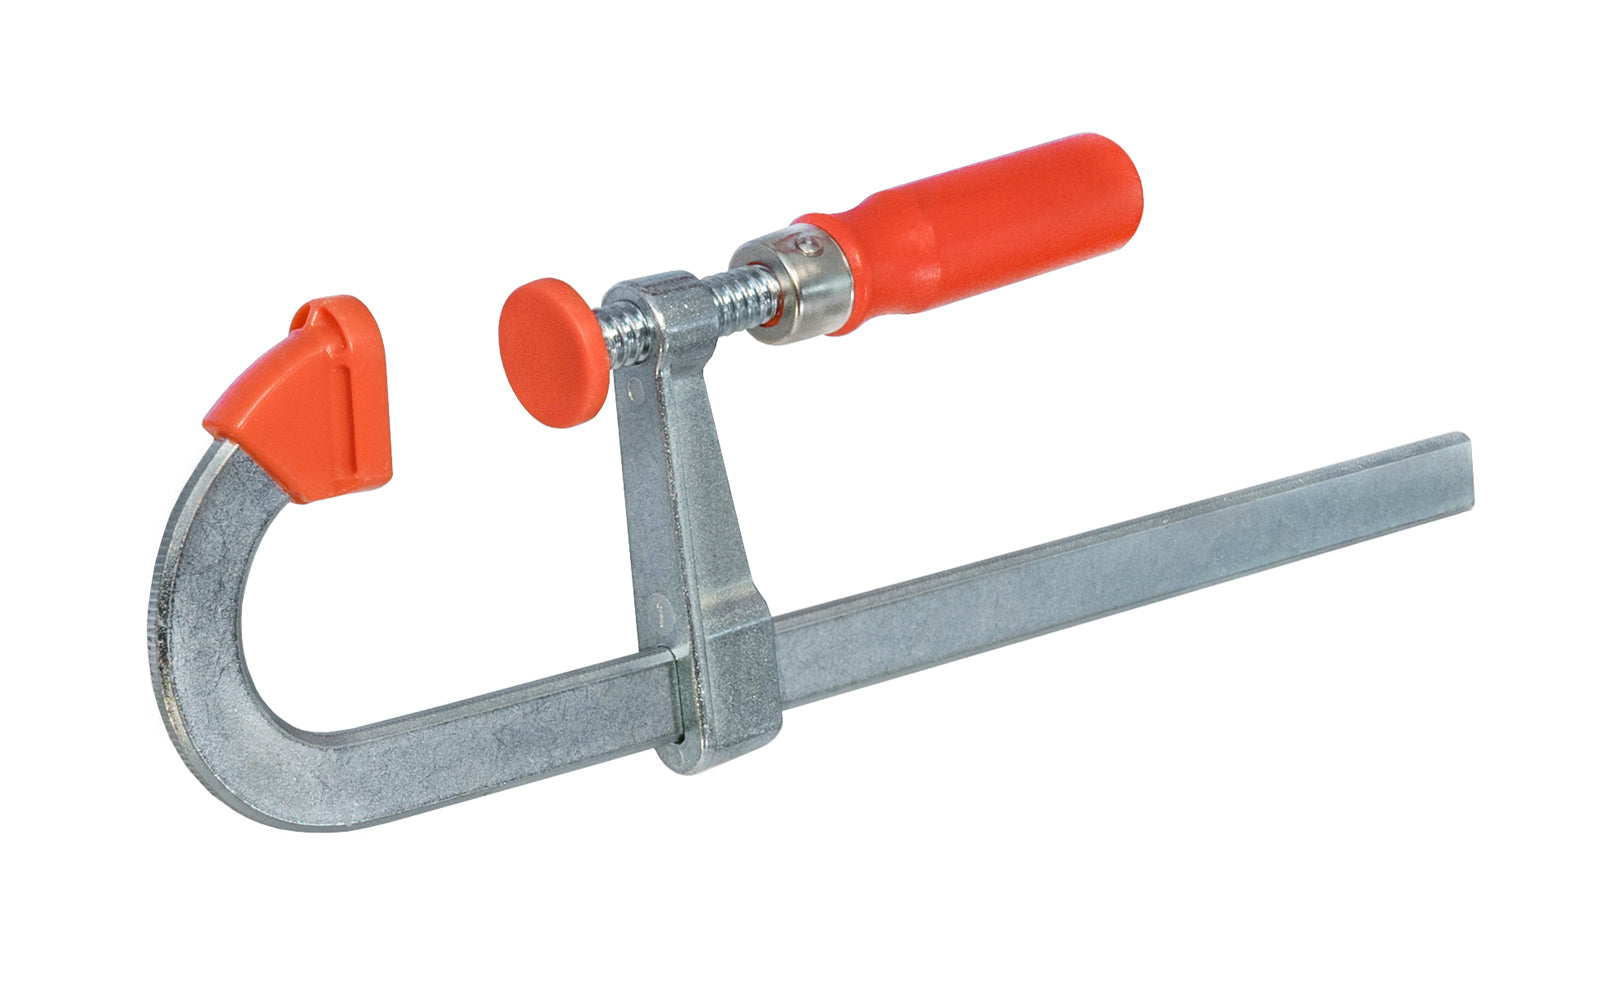 The Bessey U shaped bar clamps helps to clamp over small obstructions & apply the clamping force. Rail is made of quality steel drawn in a single piece for durability & strength. U-shape of the rail enables step-over clamping for hard-to-reach spaces. 8